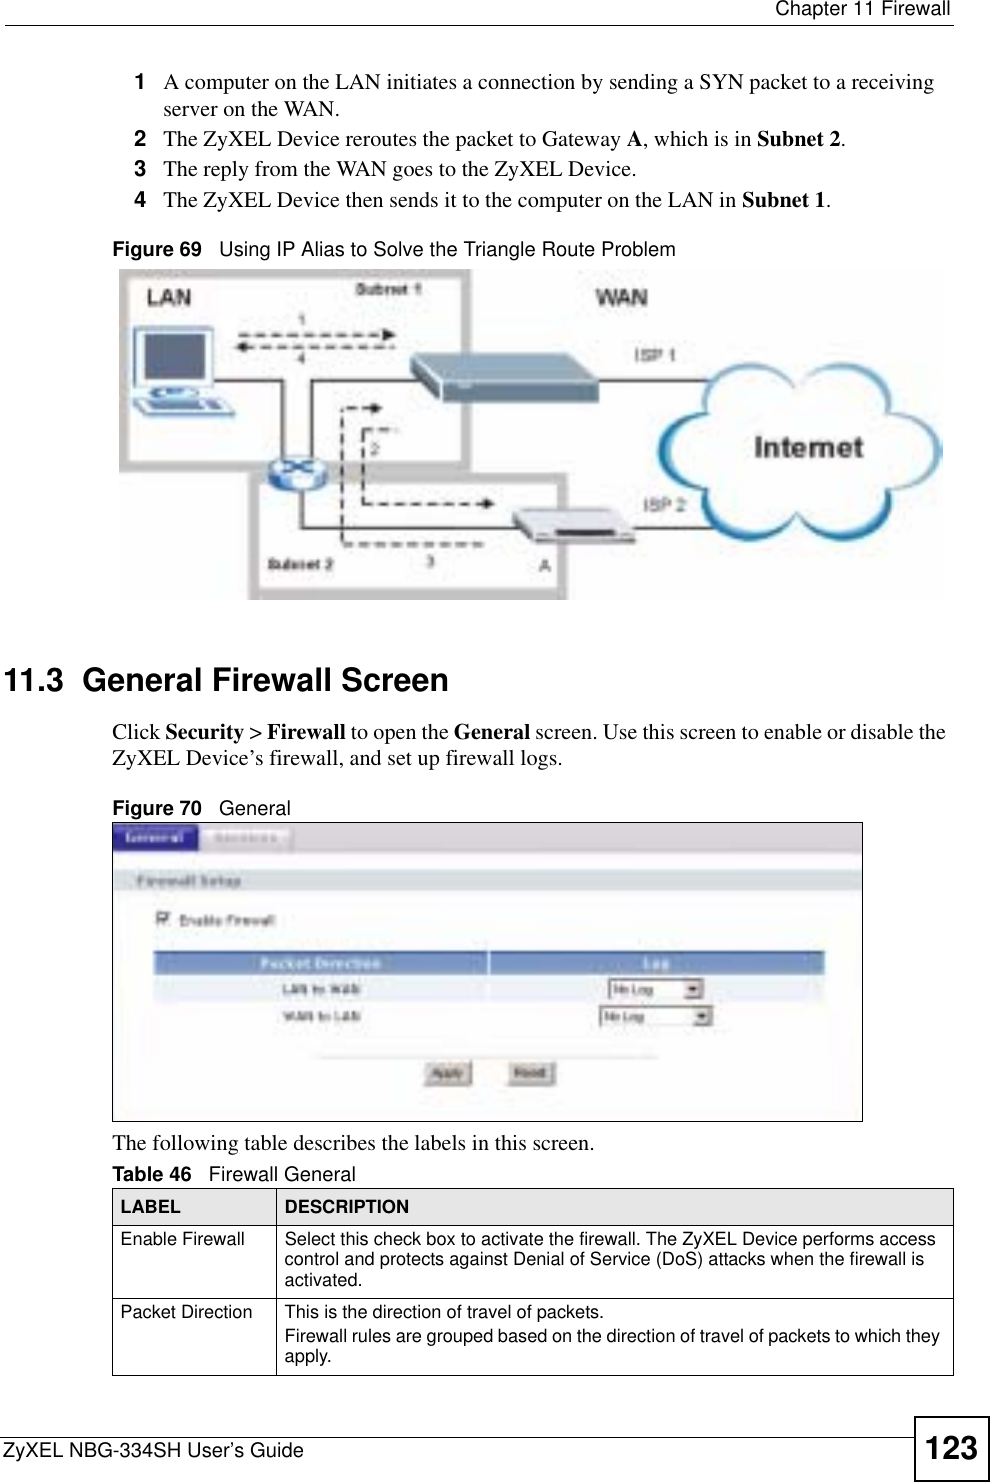  Chapter 11 FirewallZyXEL NBG-334SH User’s Guide 1231A computer on the LAN initiates a connection by sending a SYN packet to a receiving server on the WAN.2The ZyXEL Device reroutes the packet to Gateway A, which is in Subnet 2.3The reply from the WAN goes to the ZyXEL Device. 4The ZyXEL Device then sends it to the computer on the LAN in Subnet 1.Figure 69   Using IP Alias to Solve the Triangle Route Problem11.3  General Firewall Screen   Click Security &gt; Firewall to open the General screen. Use this screen to enable or disable the ZyXEL Device’s firewall, and set up firewall logs. Figure 70   GeneralThe following table describes the labels in this screen.Table 46   Firewall GeneralLABEL DESCRIPTIONEnable Firewall Select this check box to activate the firewall. The ZyXEL Device performs access control and protects against Denial of Service (DoS) attacks when the firewall is activated.Packet Direction This is the direction of travel of packets.Firewall rules are grouped based on the direction of travel of packets to which they apply. 